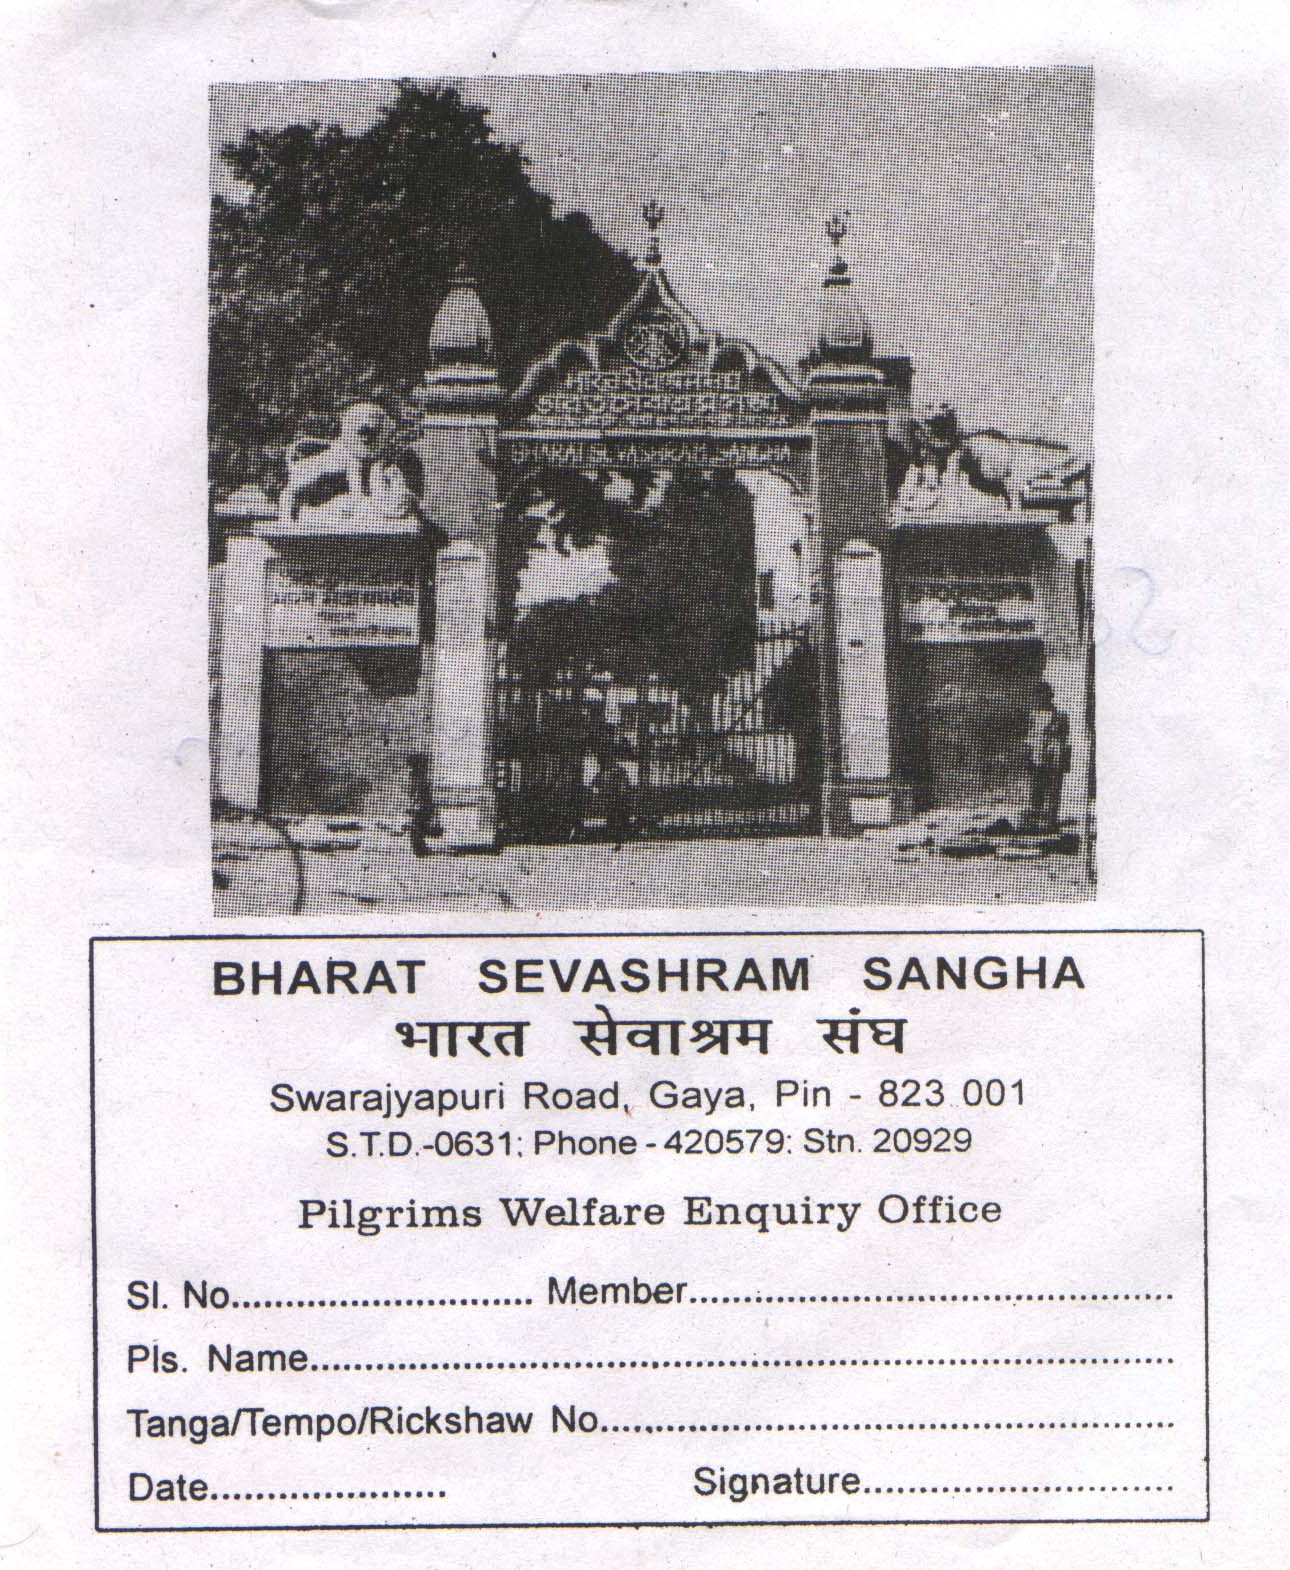 Visitors are requested to check the following picture of the entrance gate of Bharat Sevashram Sangha,Gaya branch